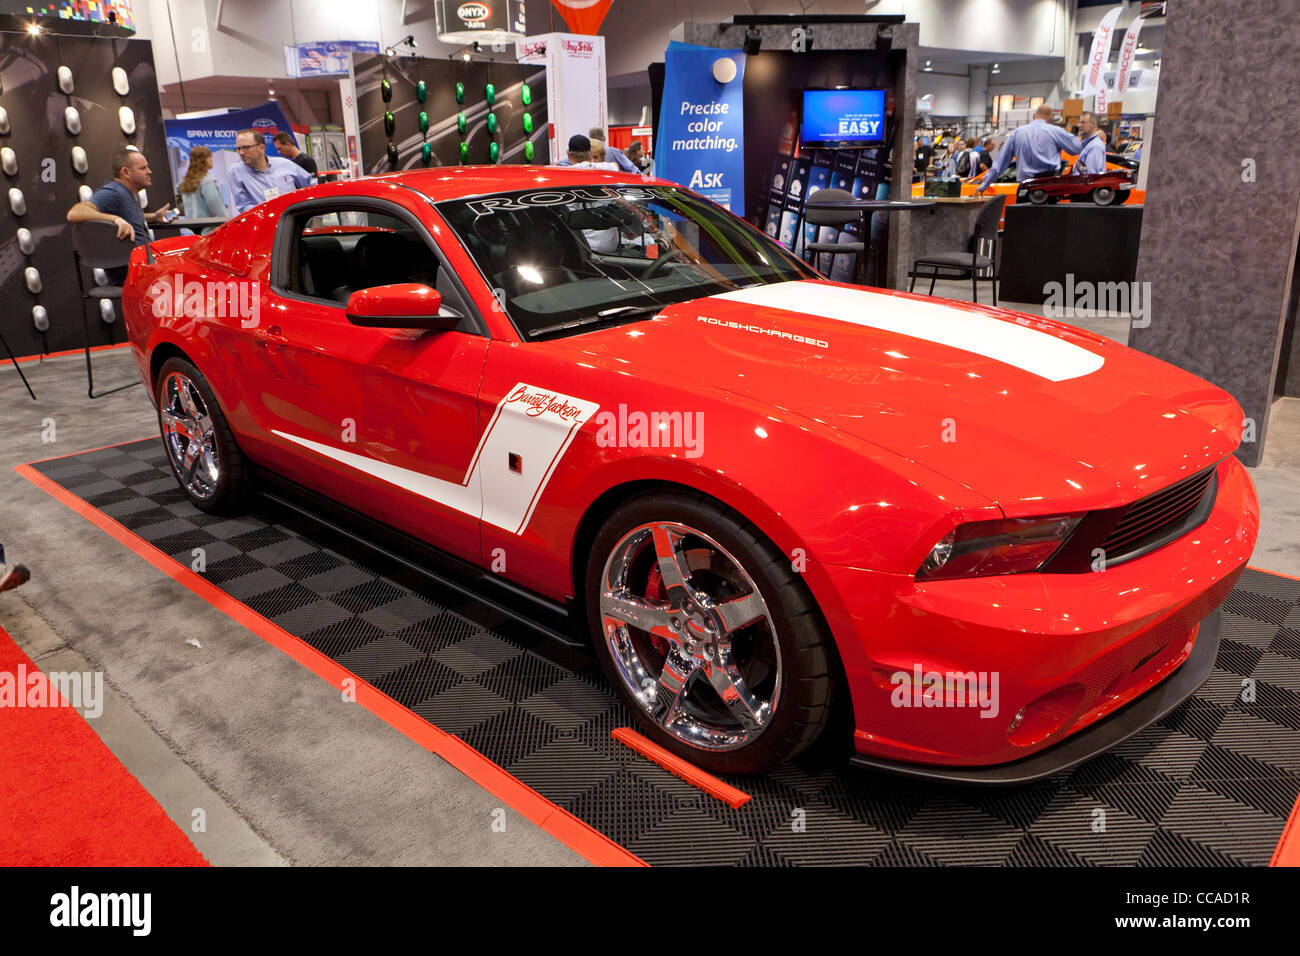 2012 Roush Barret-Jackson Ford Mustang on display at car show Stock Photo